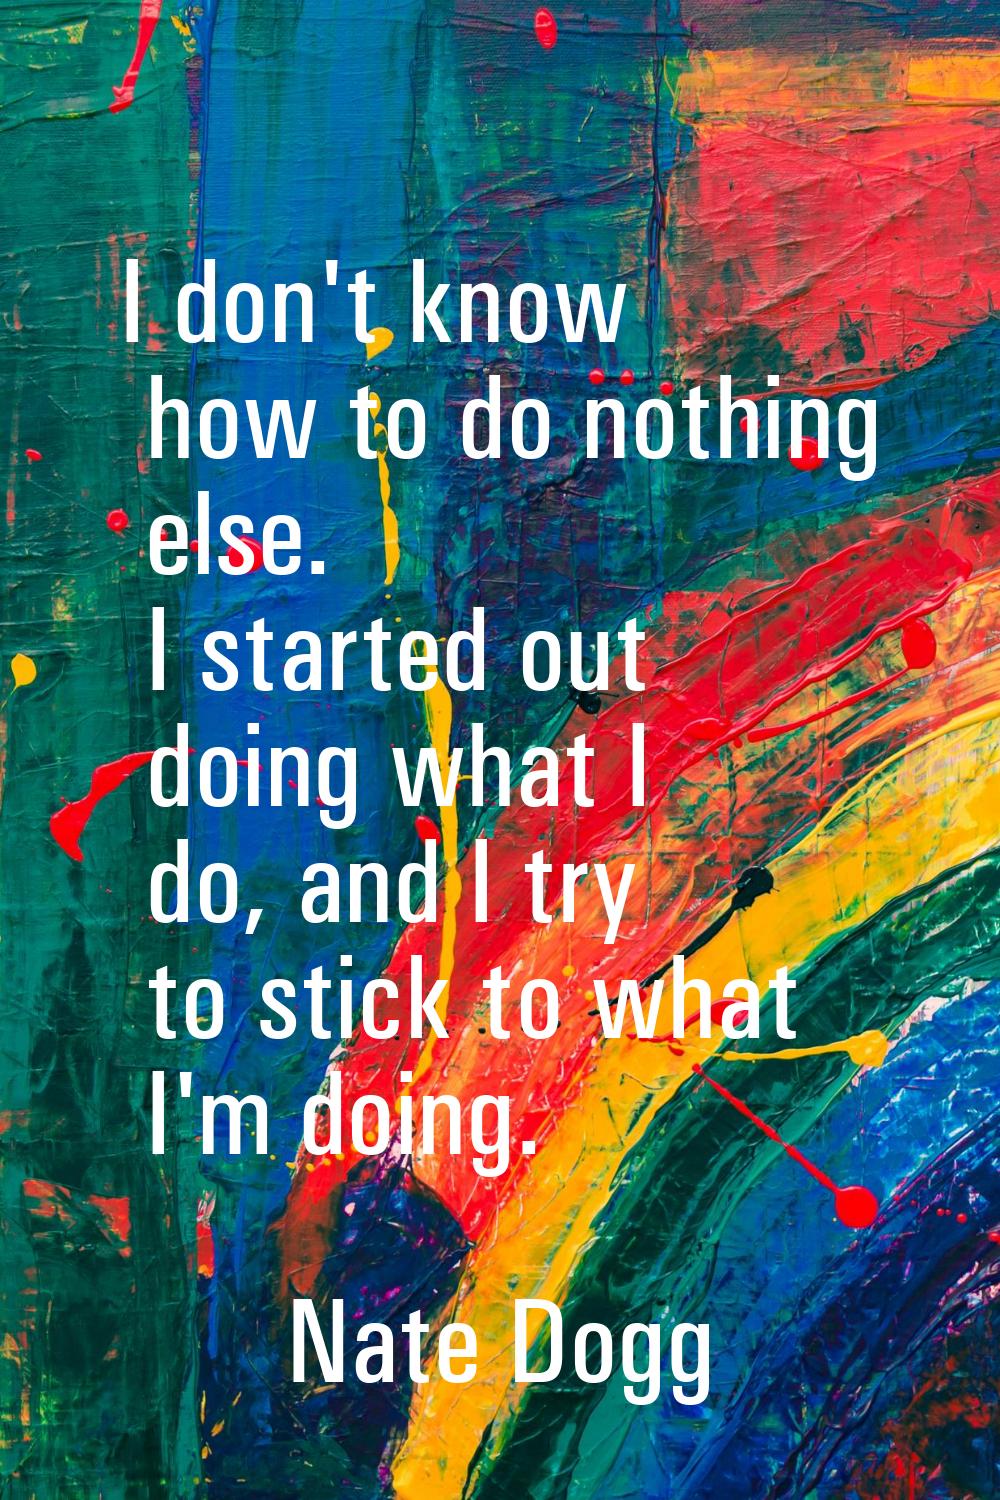 I don't know how to do nothing else. I started out doing what I do, and I try to stick to what I'm 